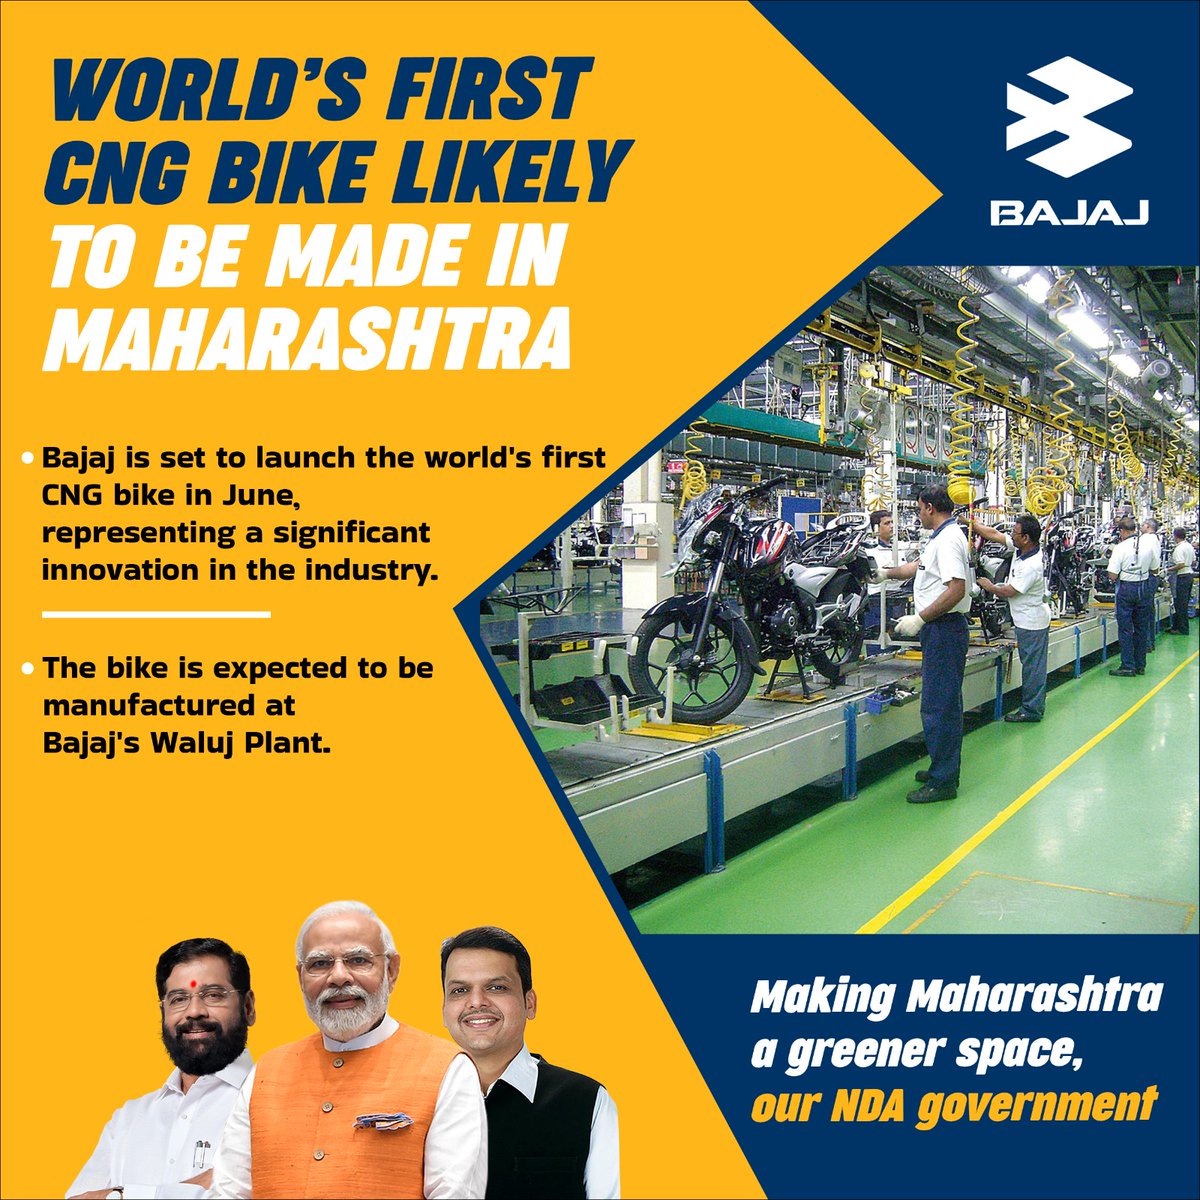 World's first CNG bike is set to be launched by Bajaj in June in their Waluj, Maharashtra plant! 
Buland Bharat ki Buland Tasveer...
🚩👏🔥